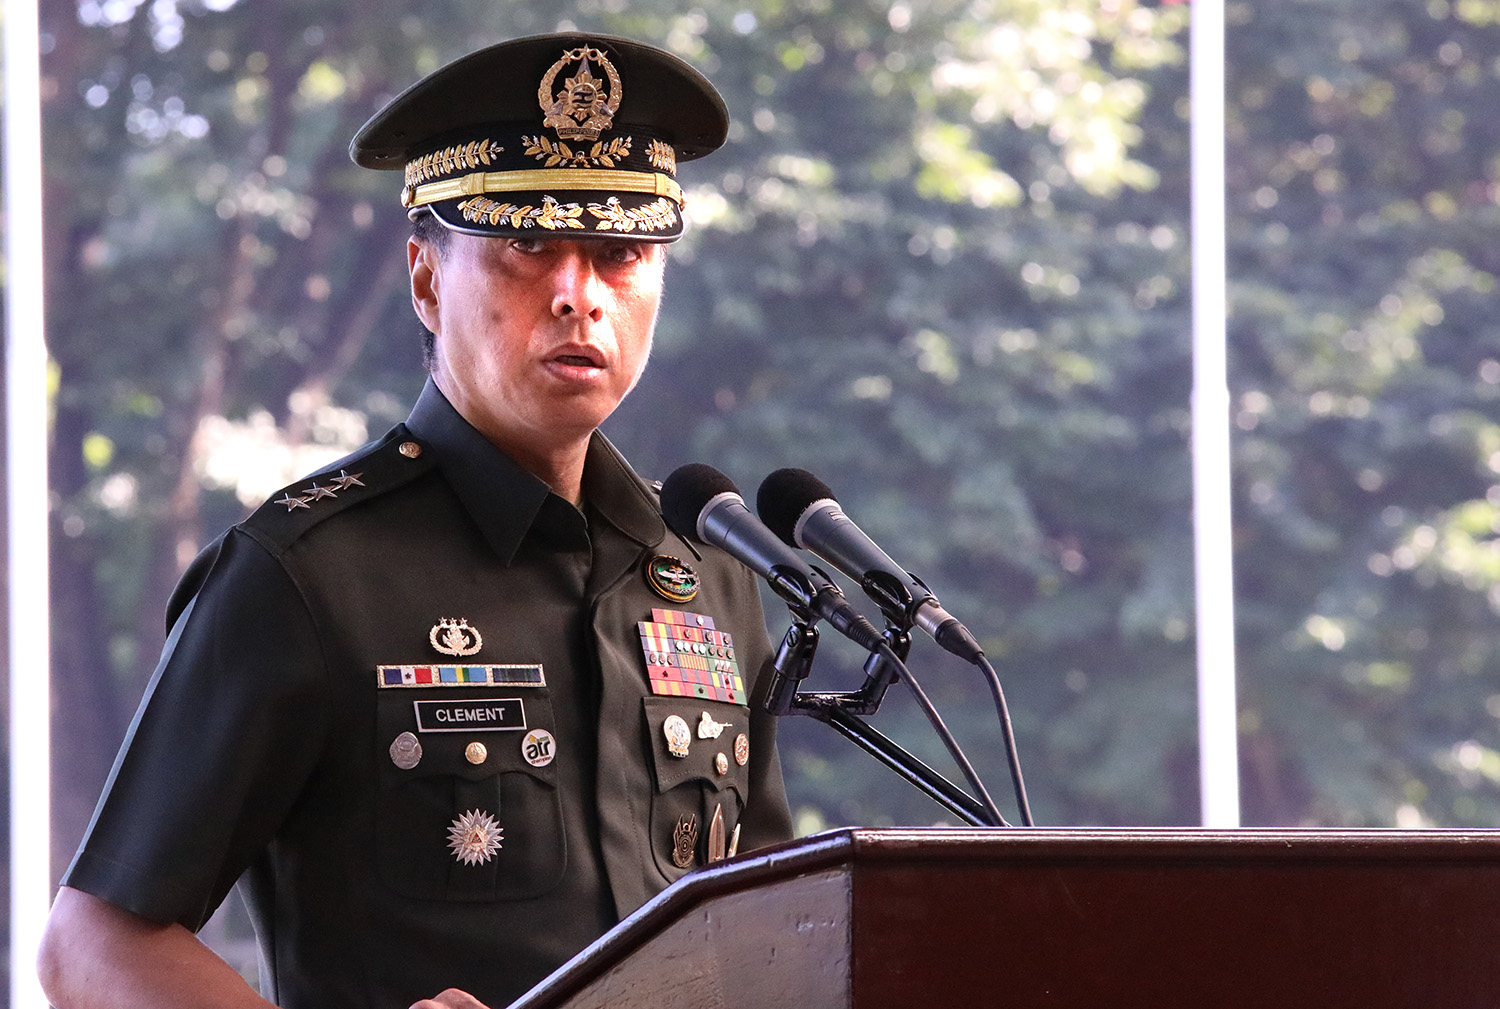 EFFORTS ENOUGH? Military chief Lieutenant General Noel Clement disagrees with a lawmaker's call to halt cadet recruitment at the Philippine Military Academy, where more cases of alleged hazing were recently discovered. File photo by Darren Langit/Rappler 